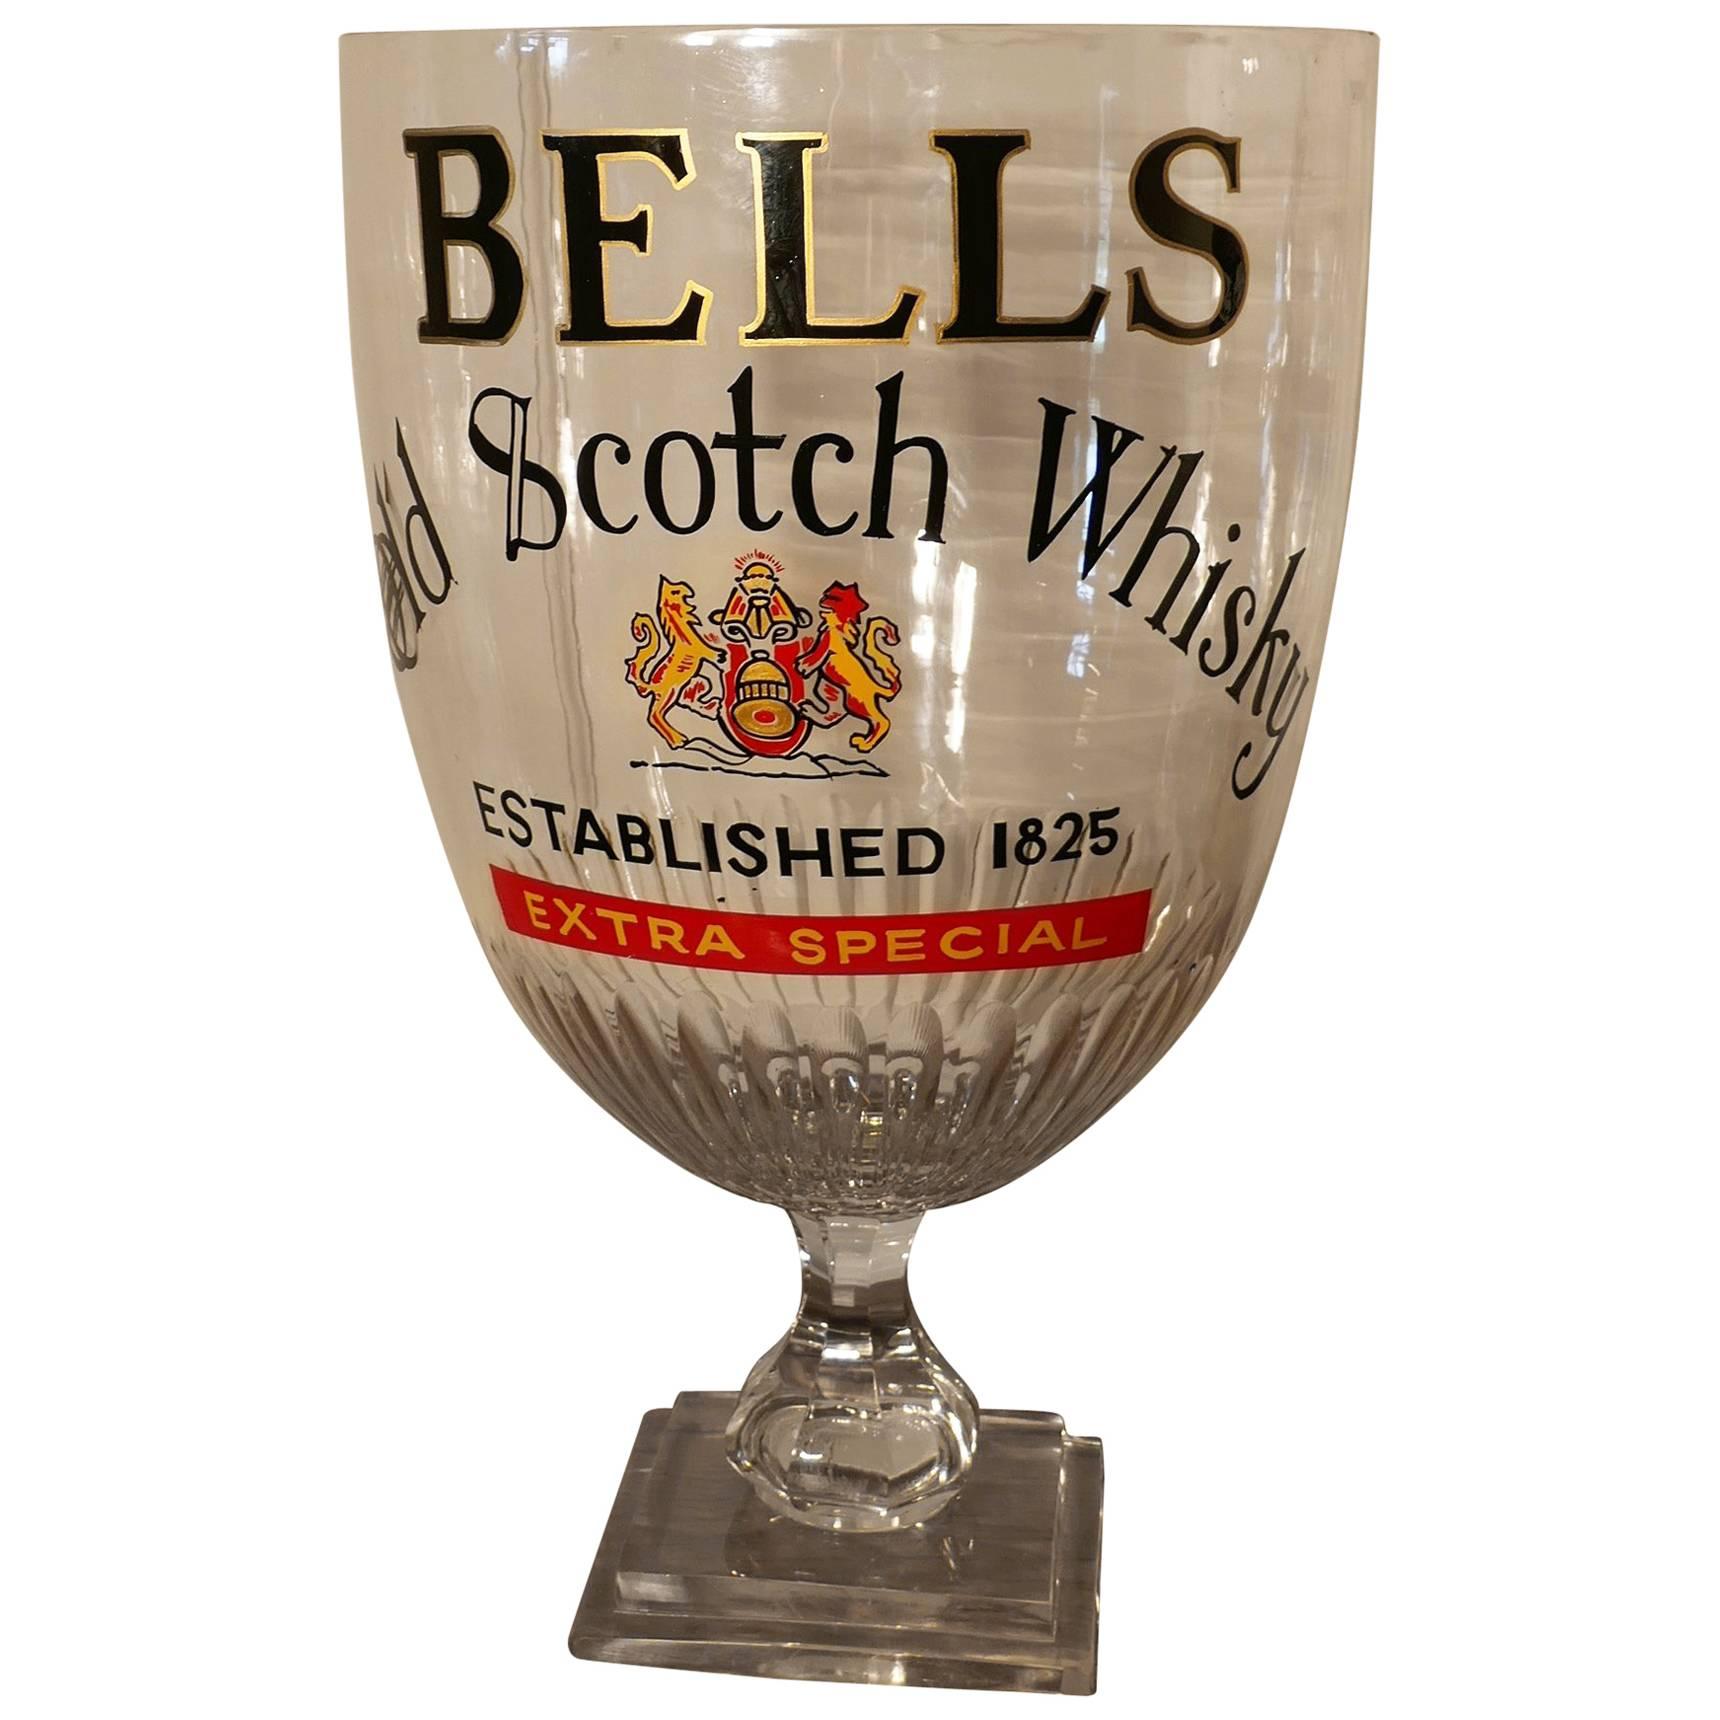 Huge Bar Chalice, Victorian Advertising Bells Scotch Whisky